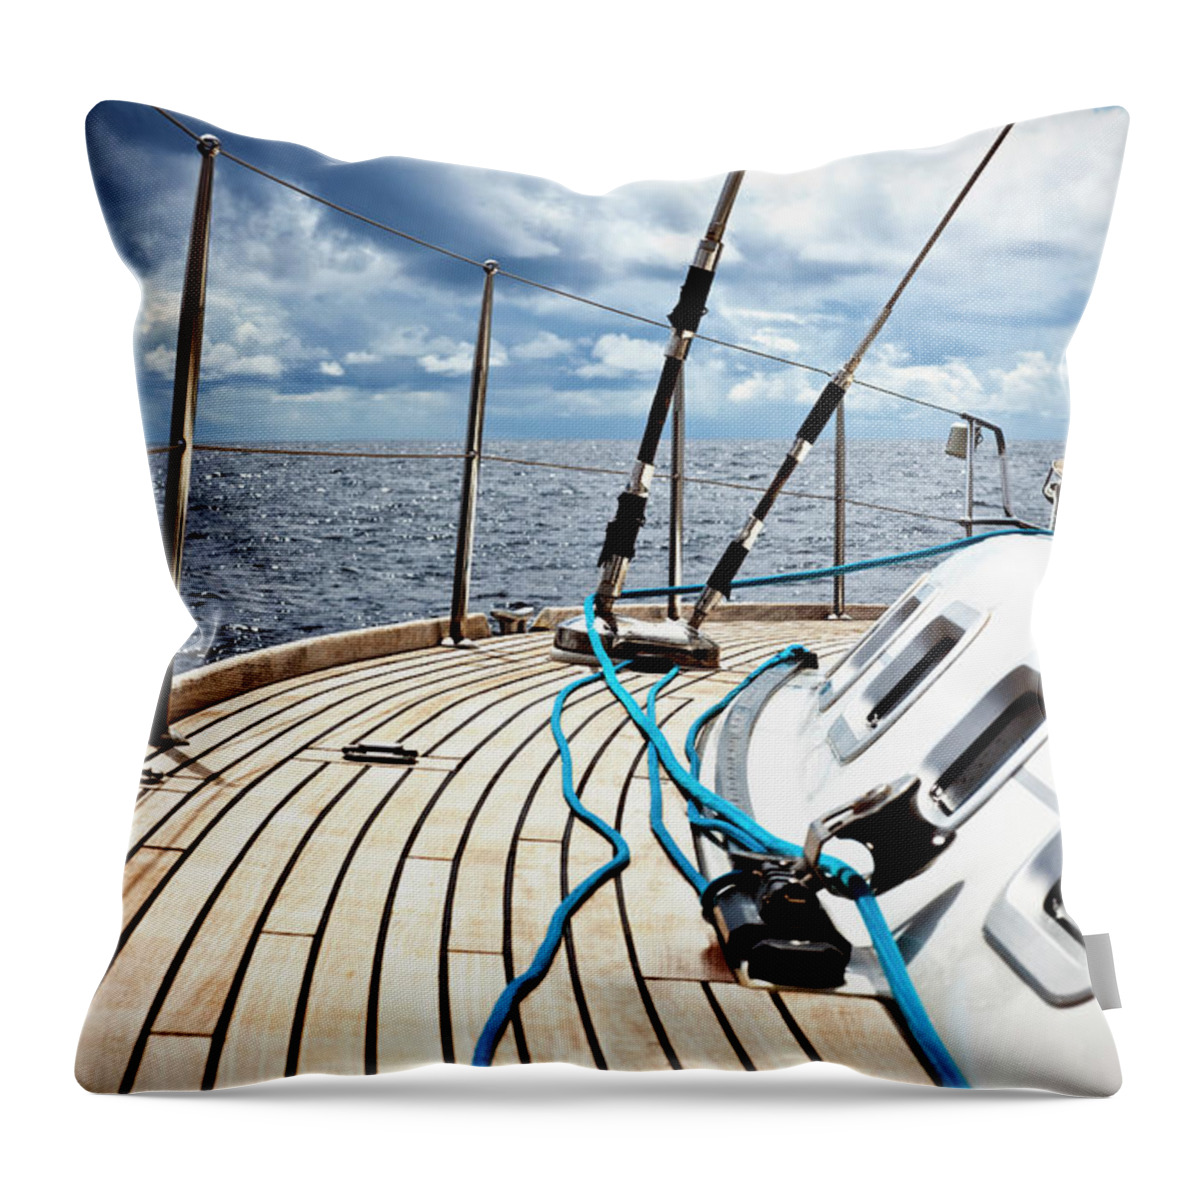 Adriatic Sea Throw Pillow featuring the photograph Sailing In The Wind With Sailboat by Mbbirdy